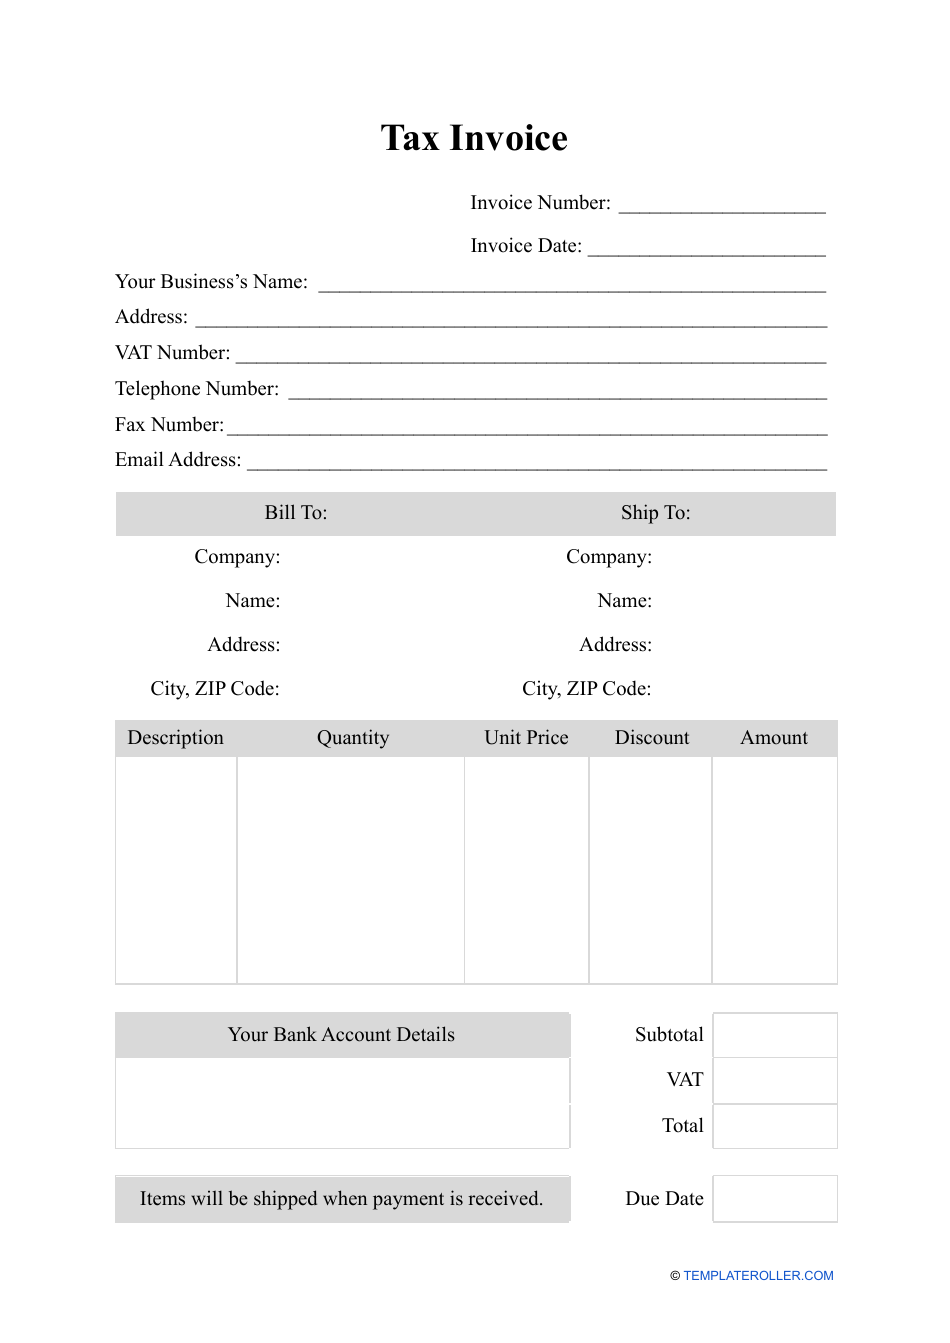 Tax Invoice Template, Page 1